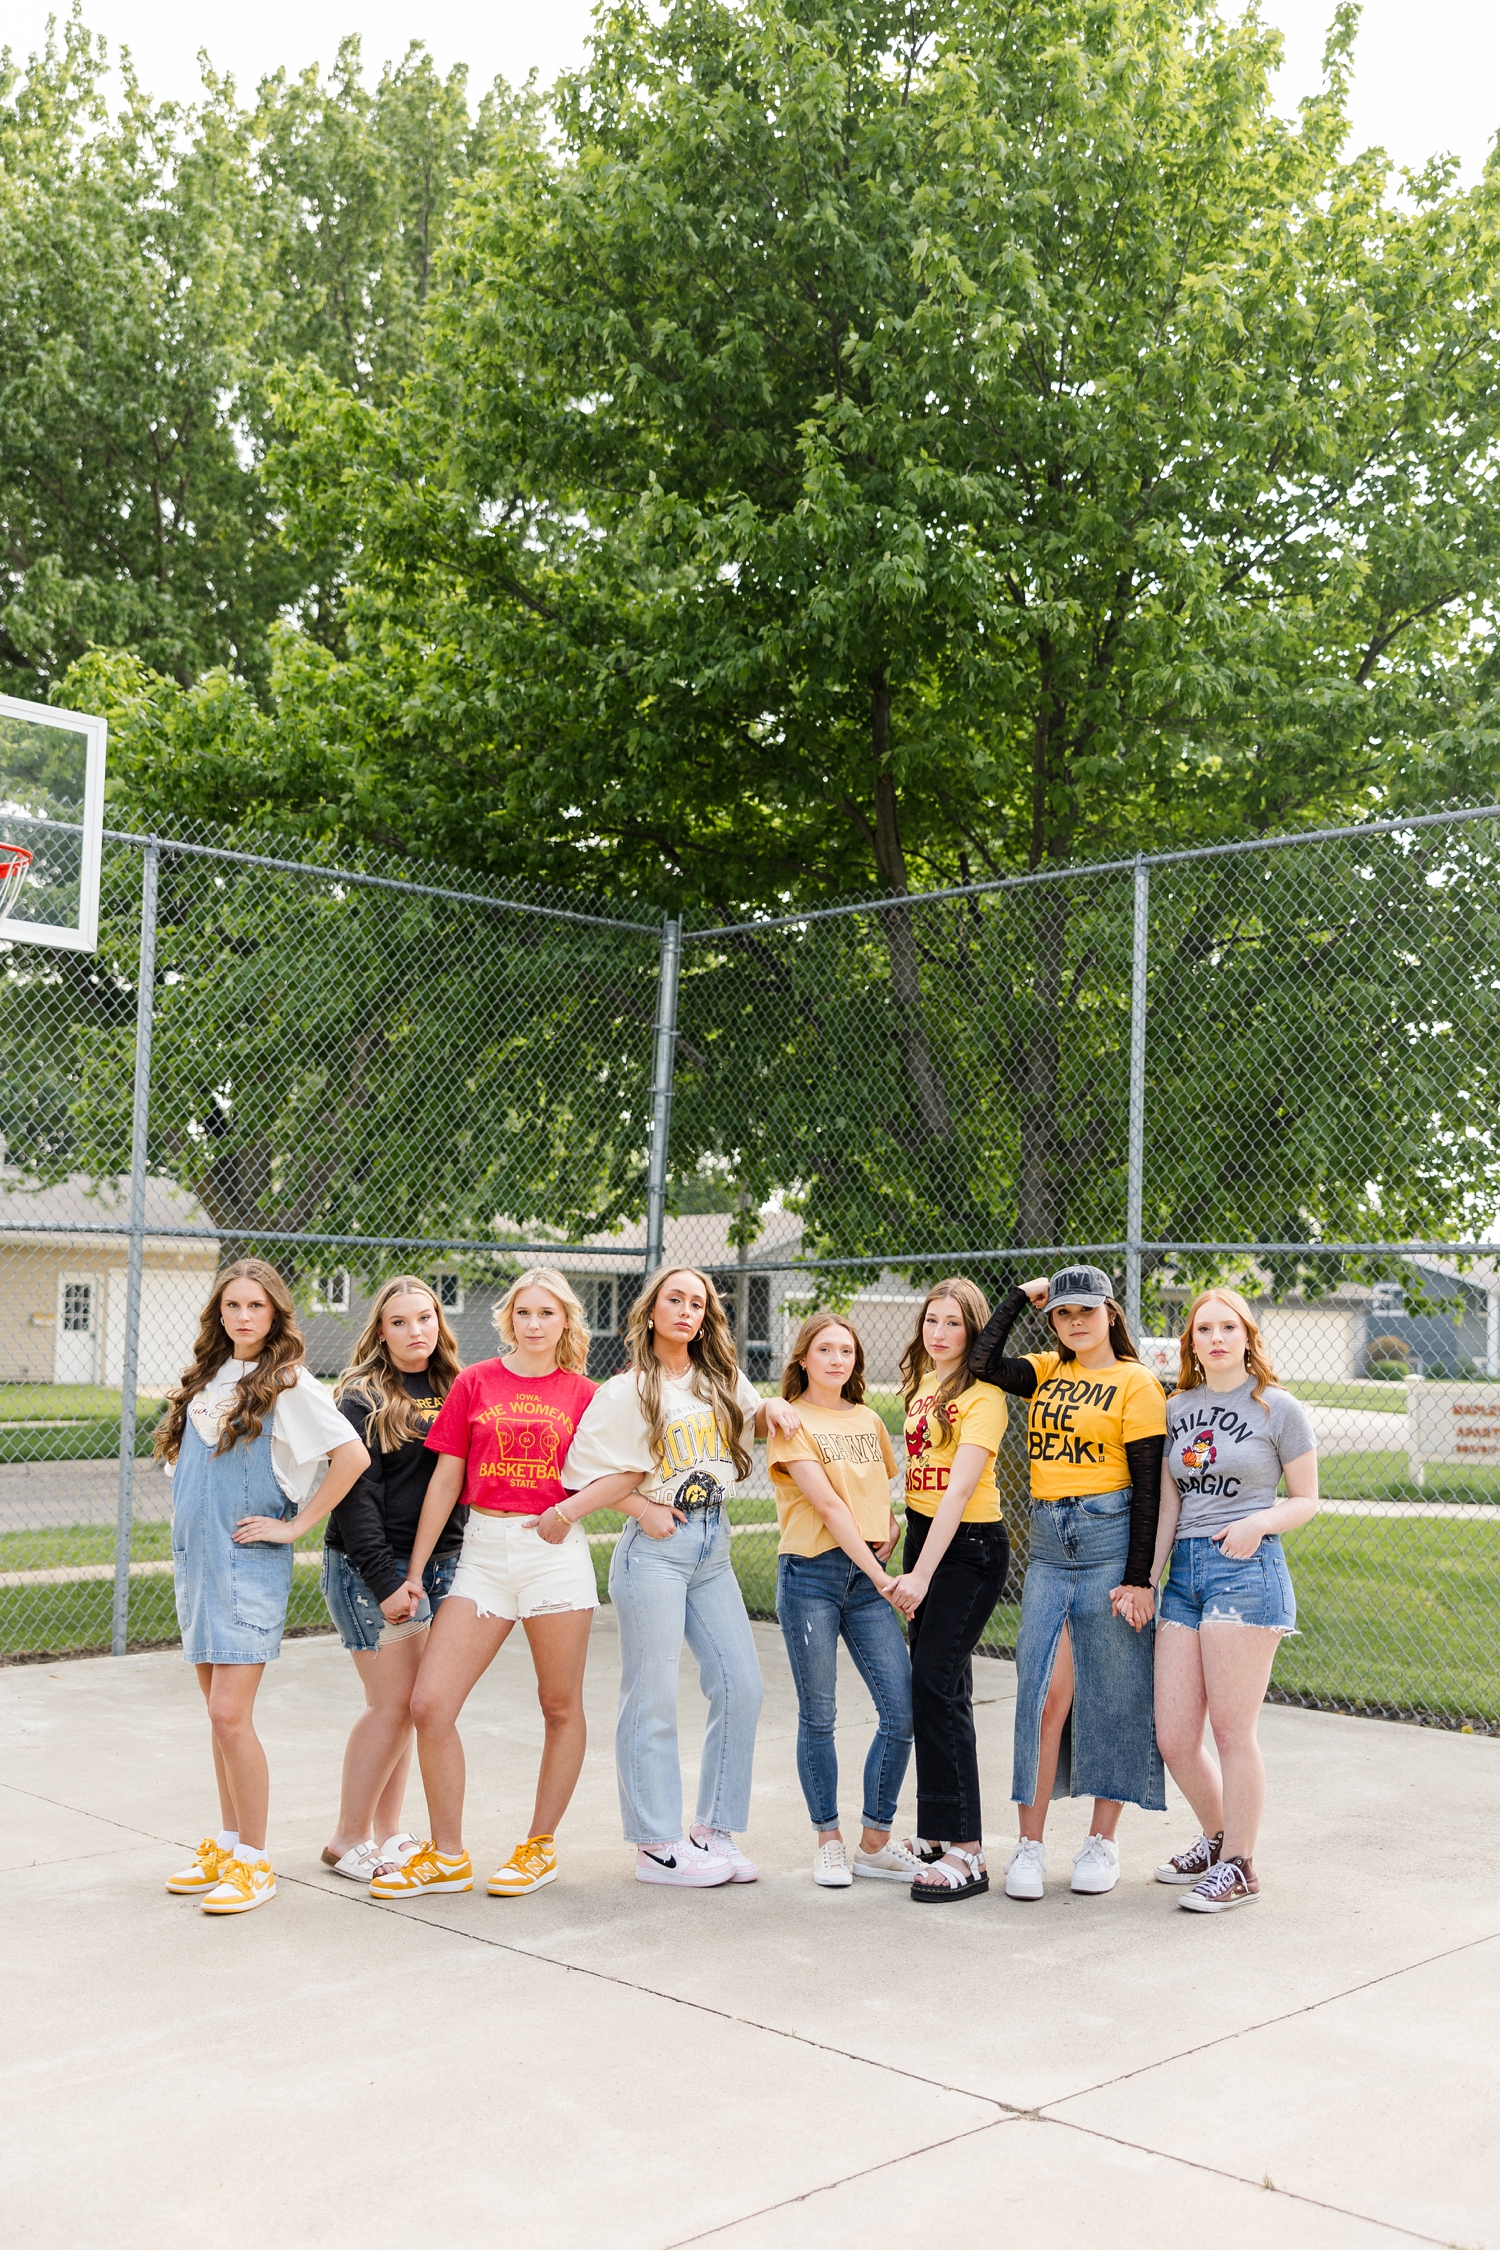 TEAM 25, all wearing Iowa or Iowa State clothing, model pose in a straight line in an outdoor basketball court | CB Studio